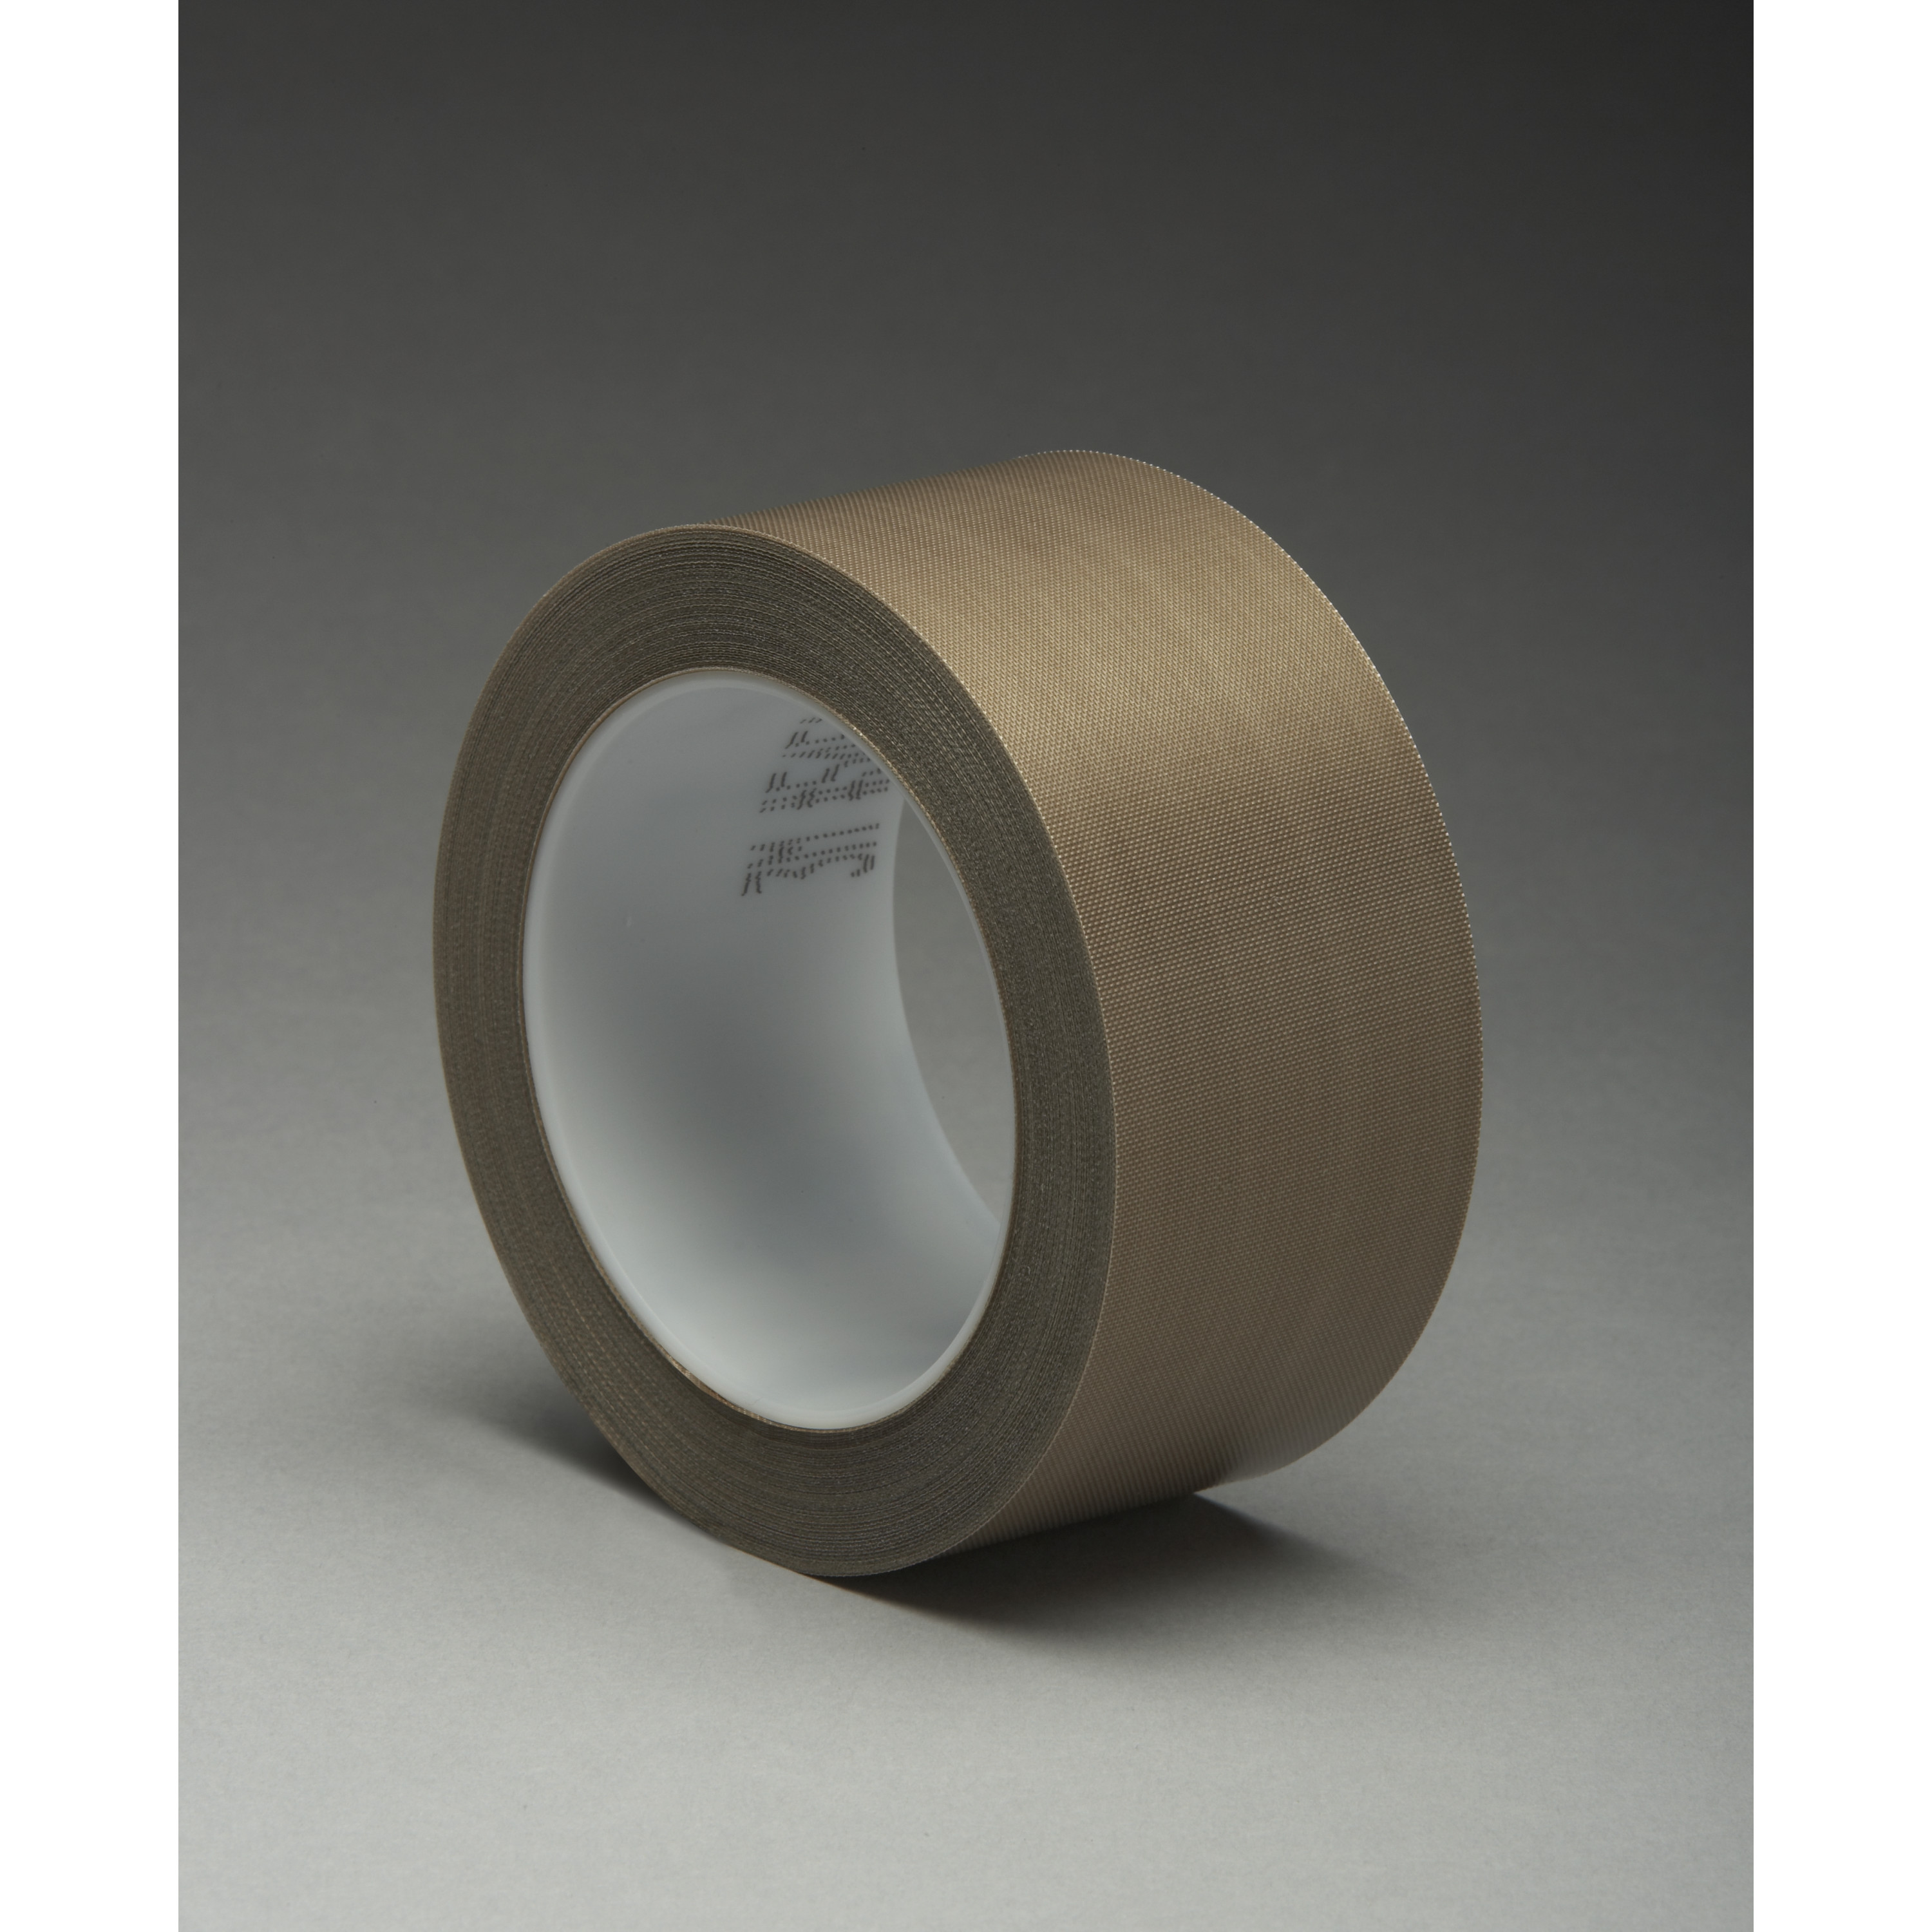 3M™ PTFE Glass Cloth Tape 5451, Brown, 1/2 in x 36 yd, 5.6 mil, 18 rolls
per case, Boxed